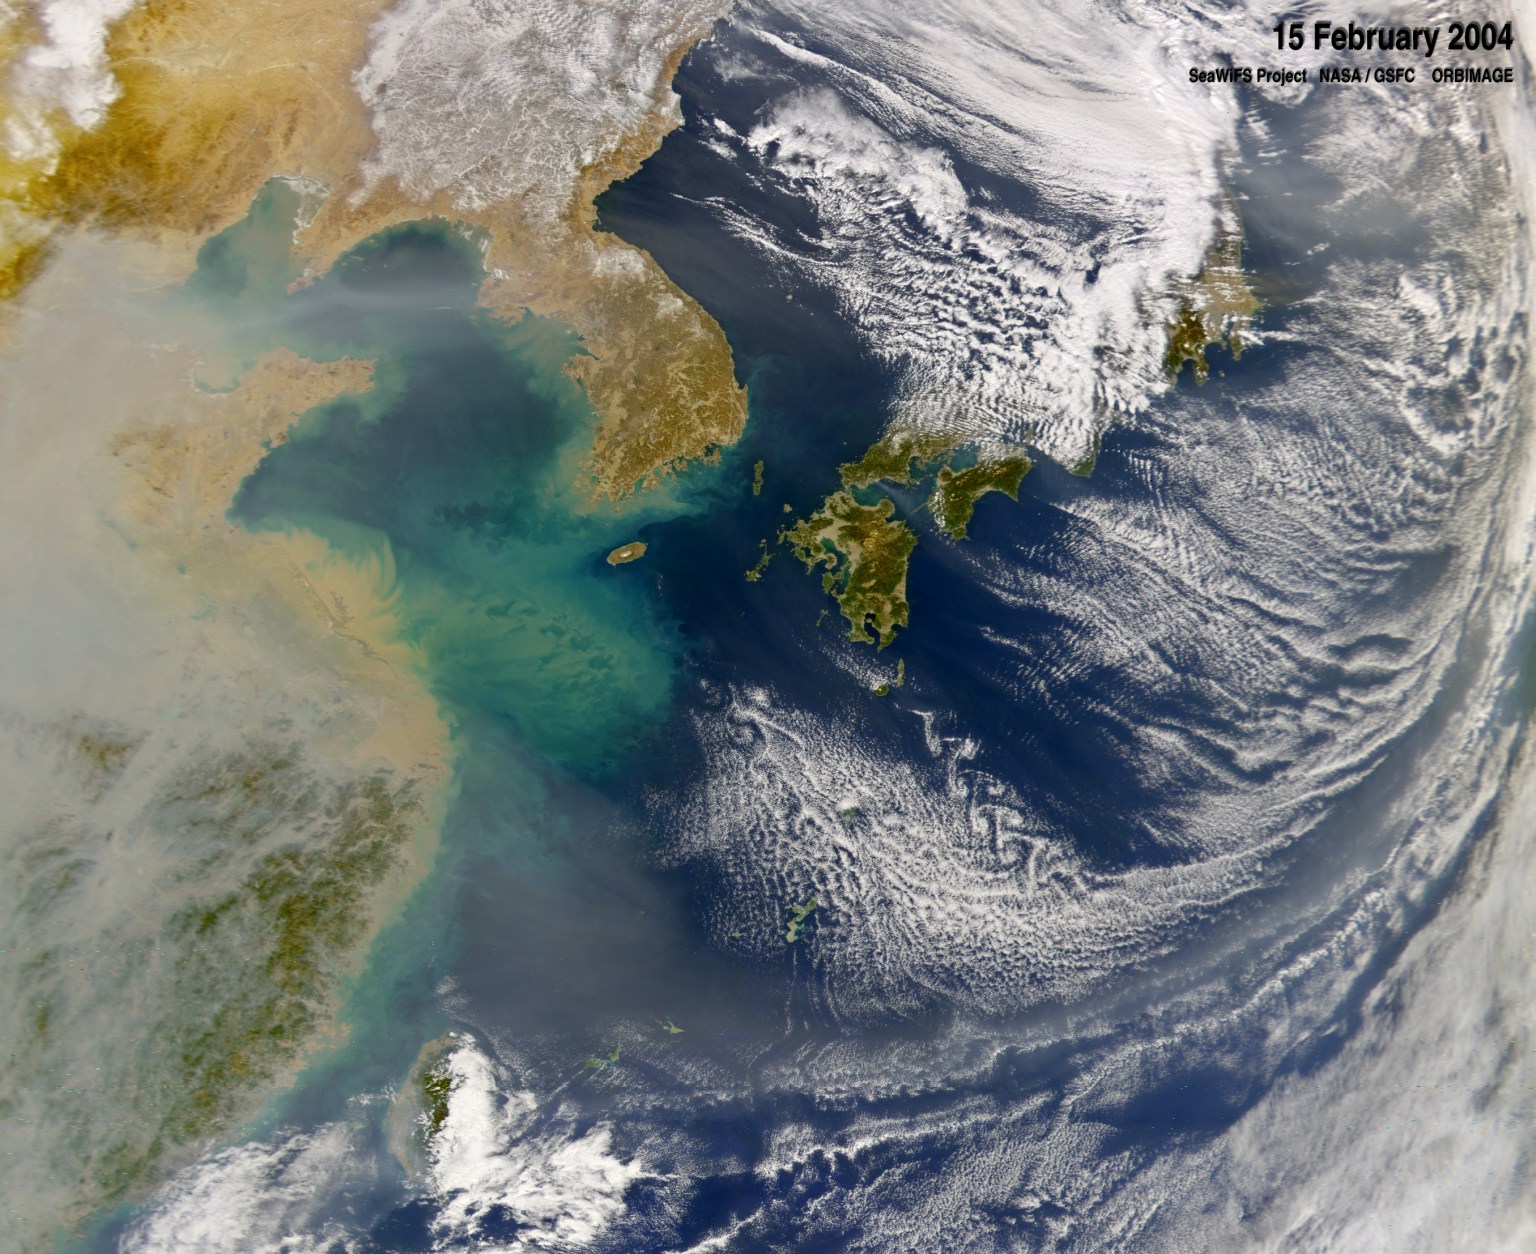 A satellite image of the Pacific ocean near eastern China, the Korean peninsula, and Japan. The land appears in shades of green and brown, with thick gray-brown clouds of pollution hanging over eastern China. The ocean is shades of deep blue and turquoise, and thin white clouds swirl over much of the right side of the image.